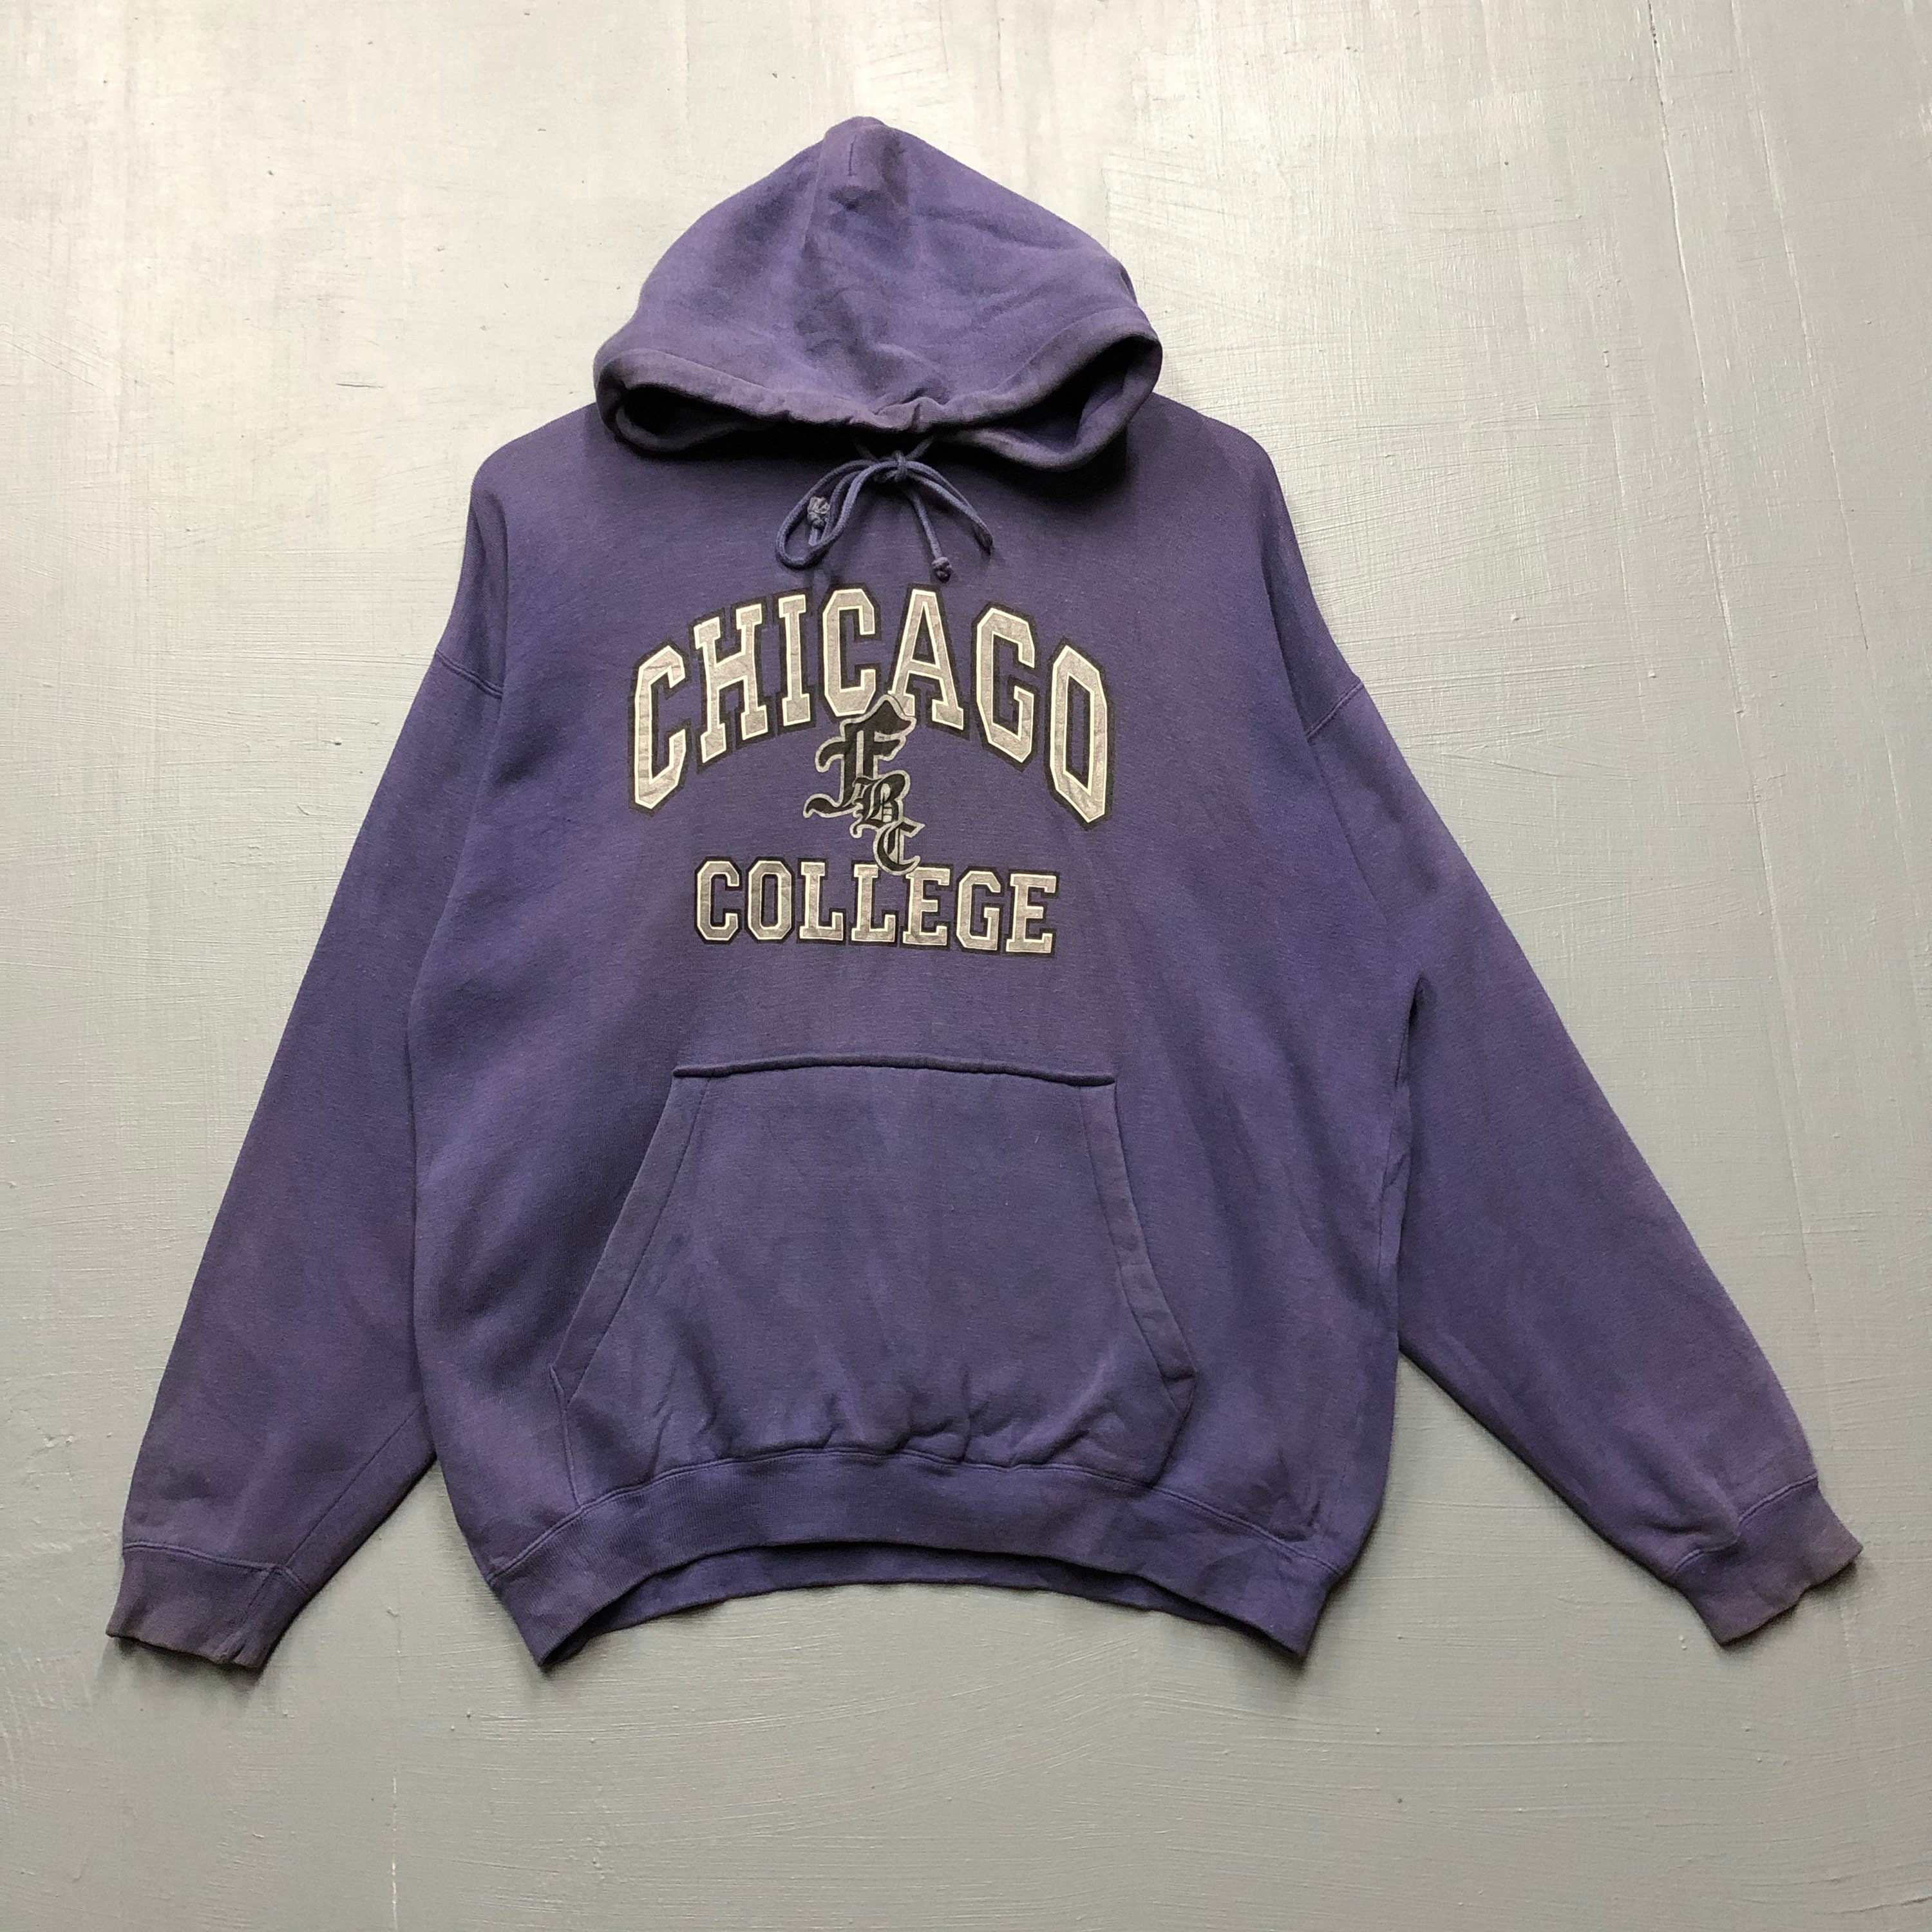 Rare Vintage Chicago college hoodie sweater pullover jumper | Etsy